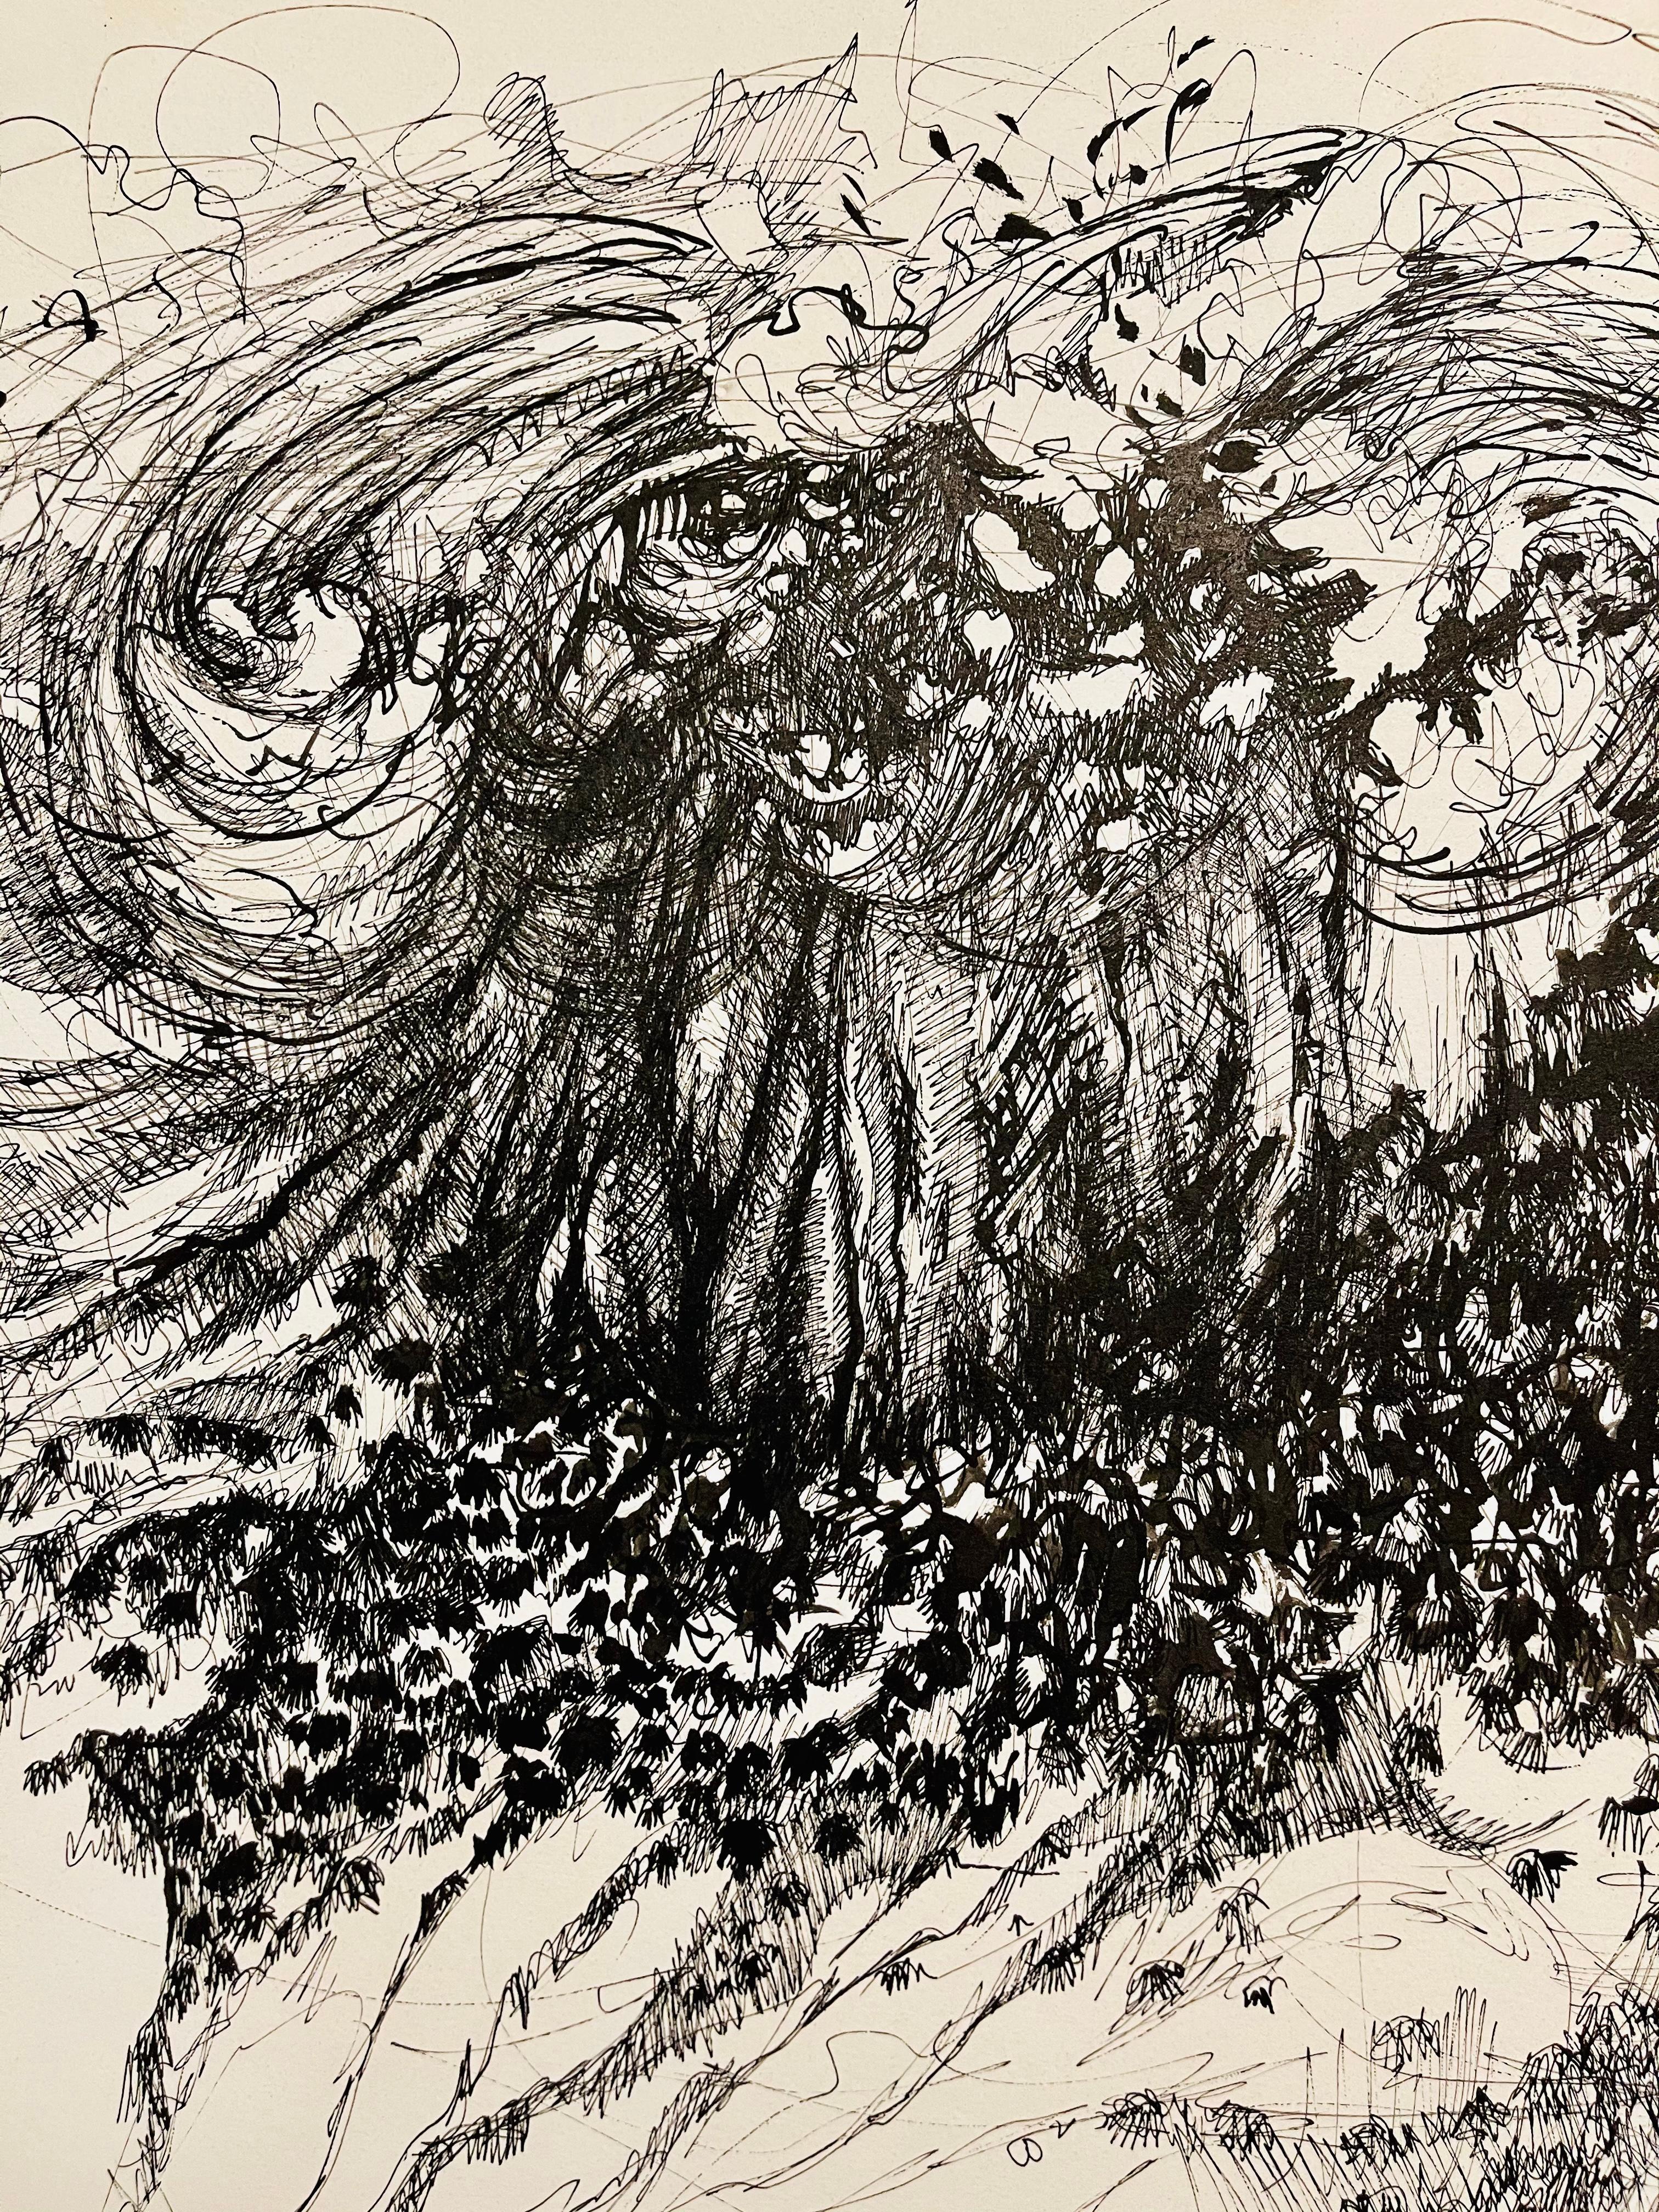 Artist: Ian Hornak (1944-2002)
Title: Untitled (Apocalyptic Tropical Landscape)
Year: 1973
Medium: Ink on heavy archival paper
Size: 22 x 30 inches
Condition: Good
Provenance: Estate of Ian Hornak, East Hampton, NY
Notes: A rare original landscape